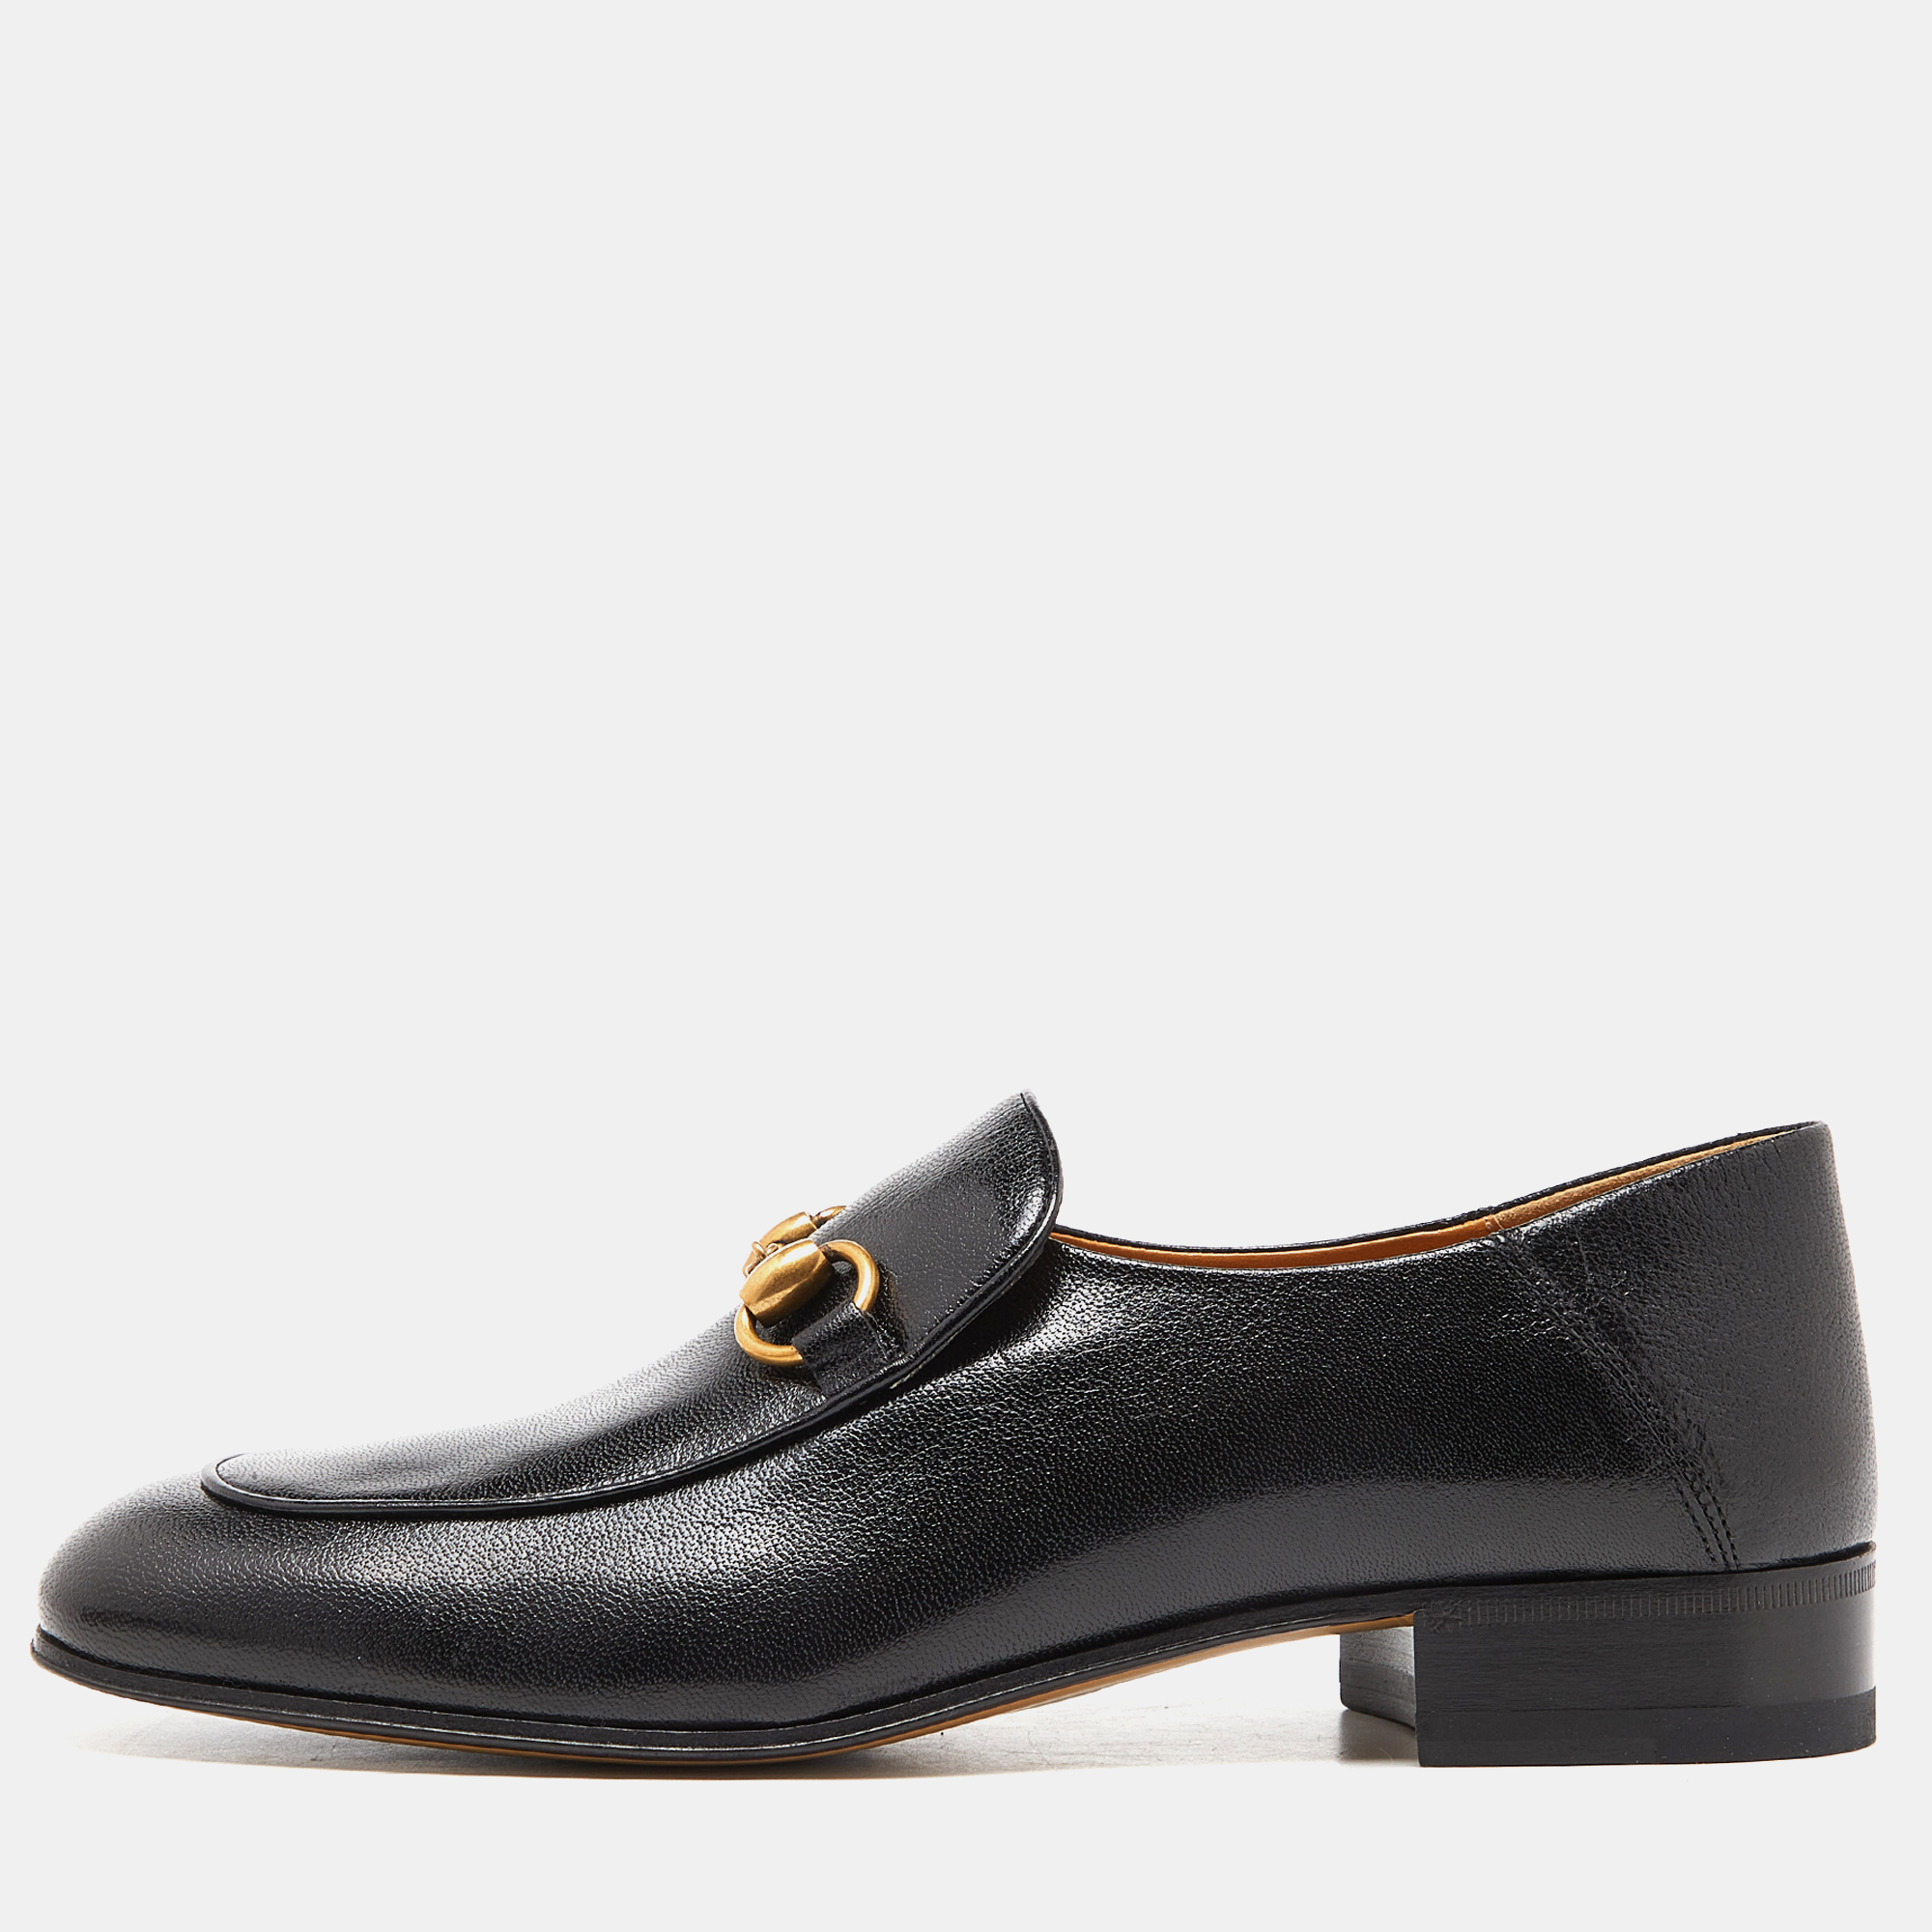 Gucci Black Leather Horsebit Loafers Size 38.5